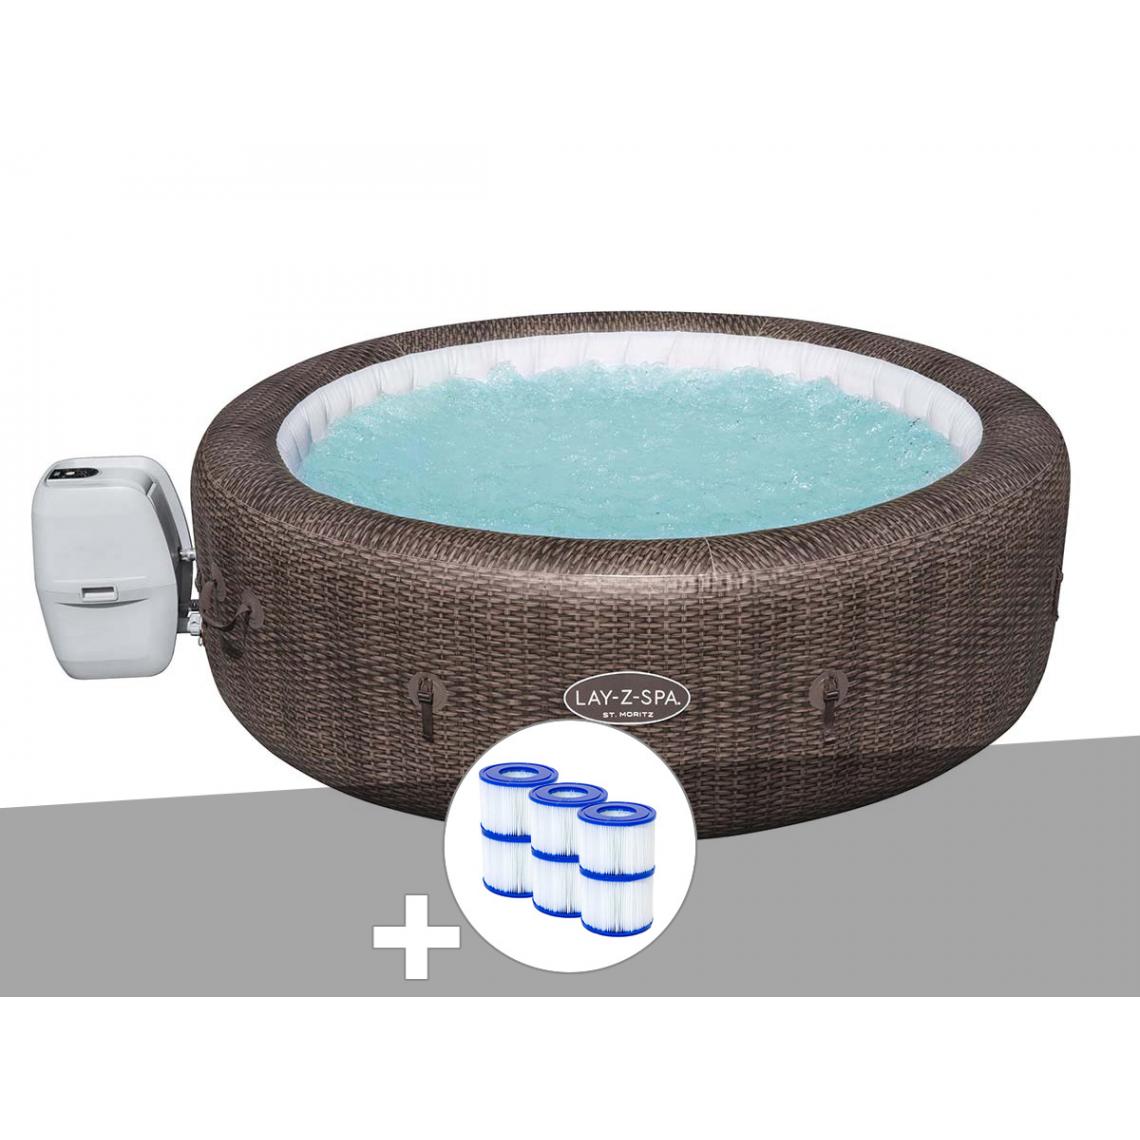 Bestway - Kit spa gonflable Bestway Lay-Z-Spa St Moritz rond Airjet 5/7 places + 6 filtres - Spa gonflable